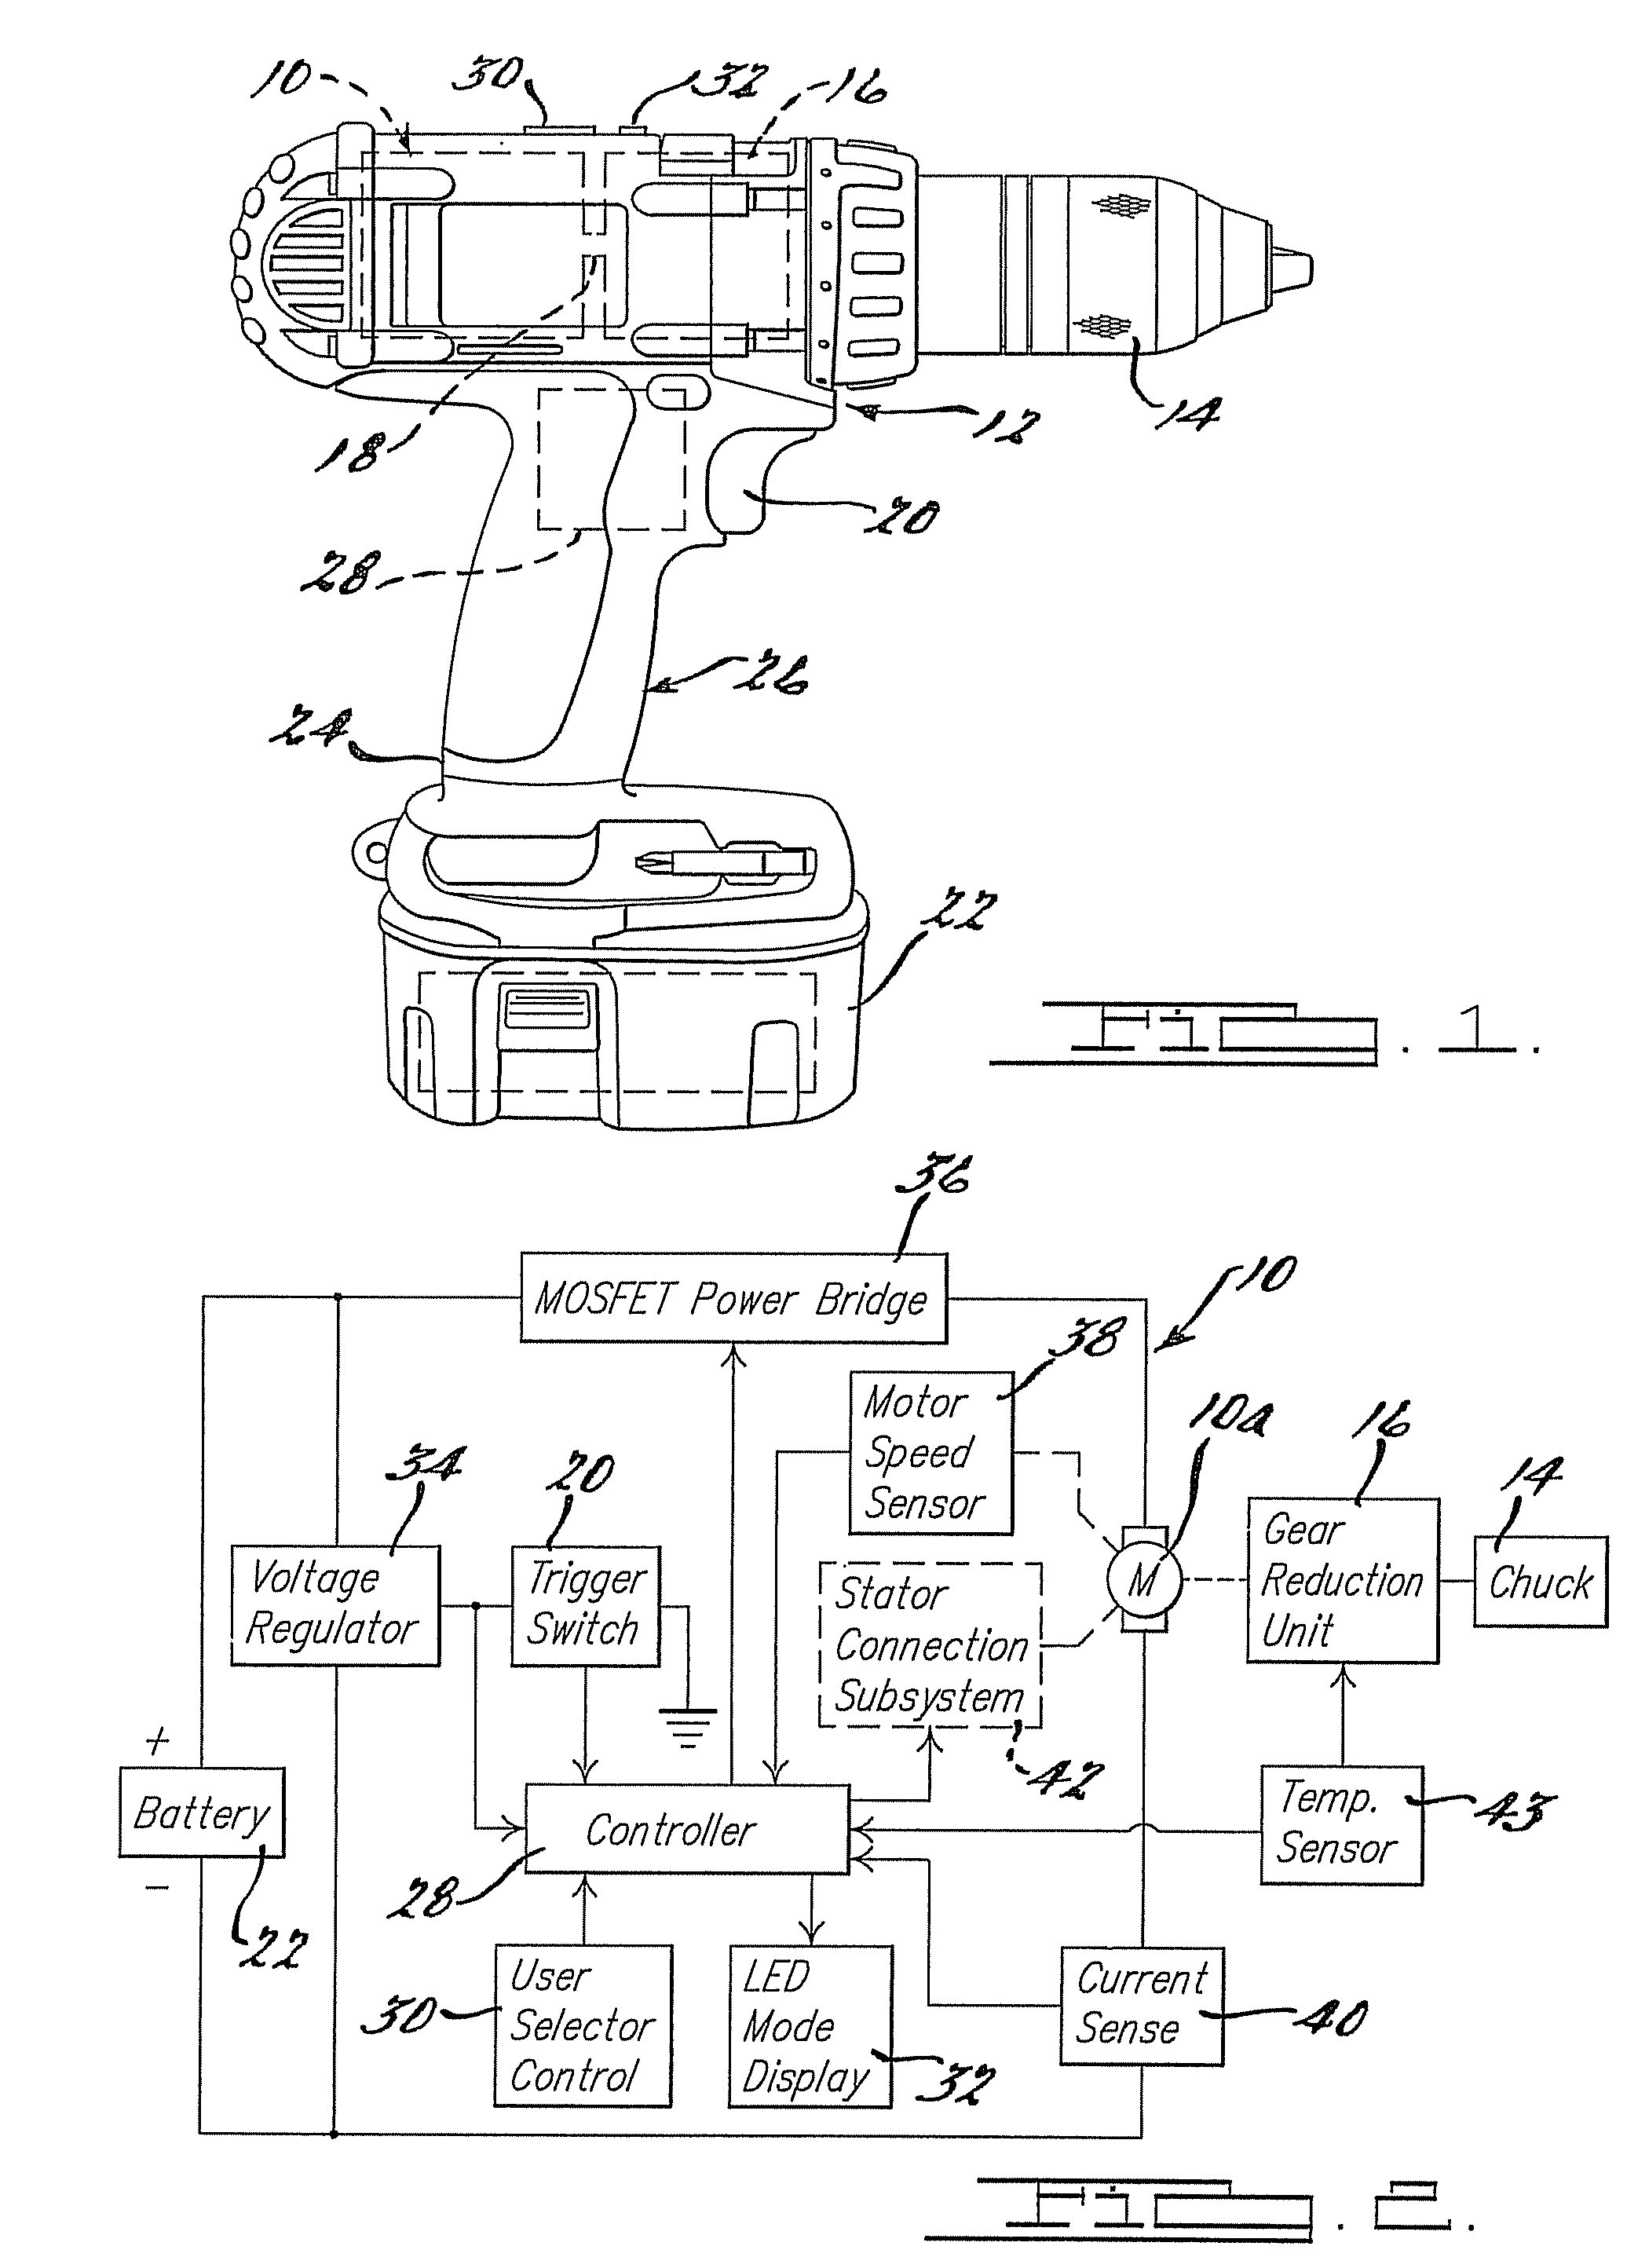 Electronically commutated motor and control system